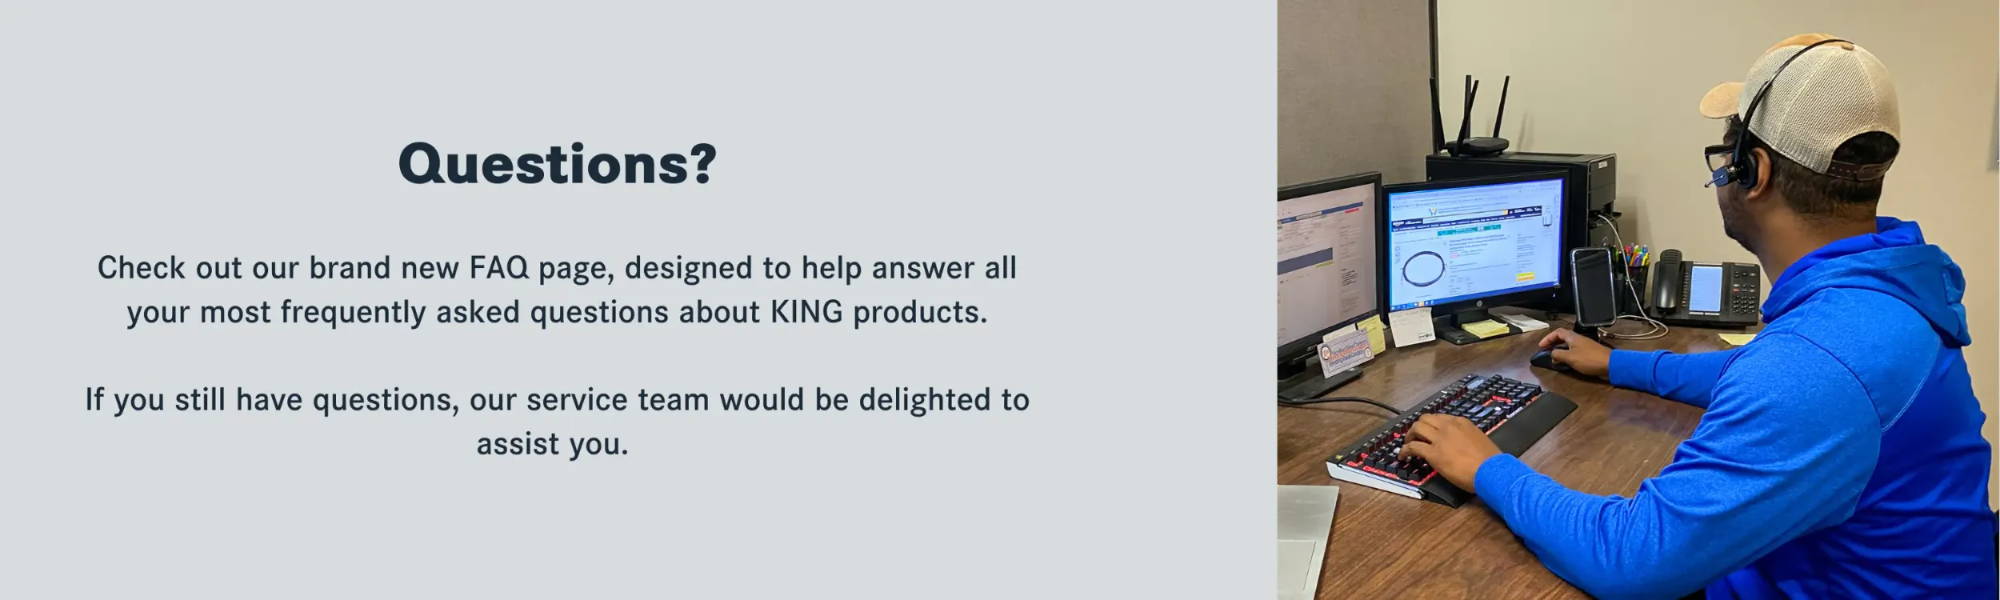 Comprehensive FAQ section with detailed answers to frequently asked questions about product features, installation, troubleshooting, and customer service support for KING Connect